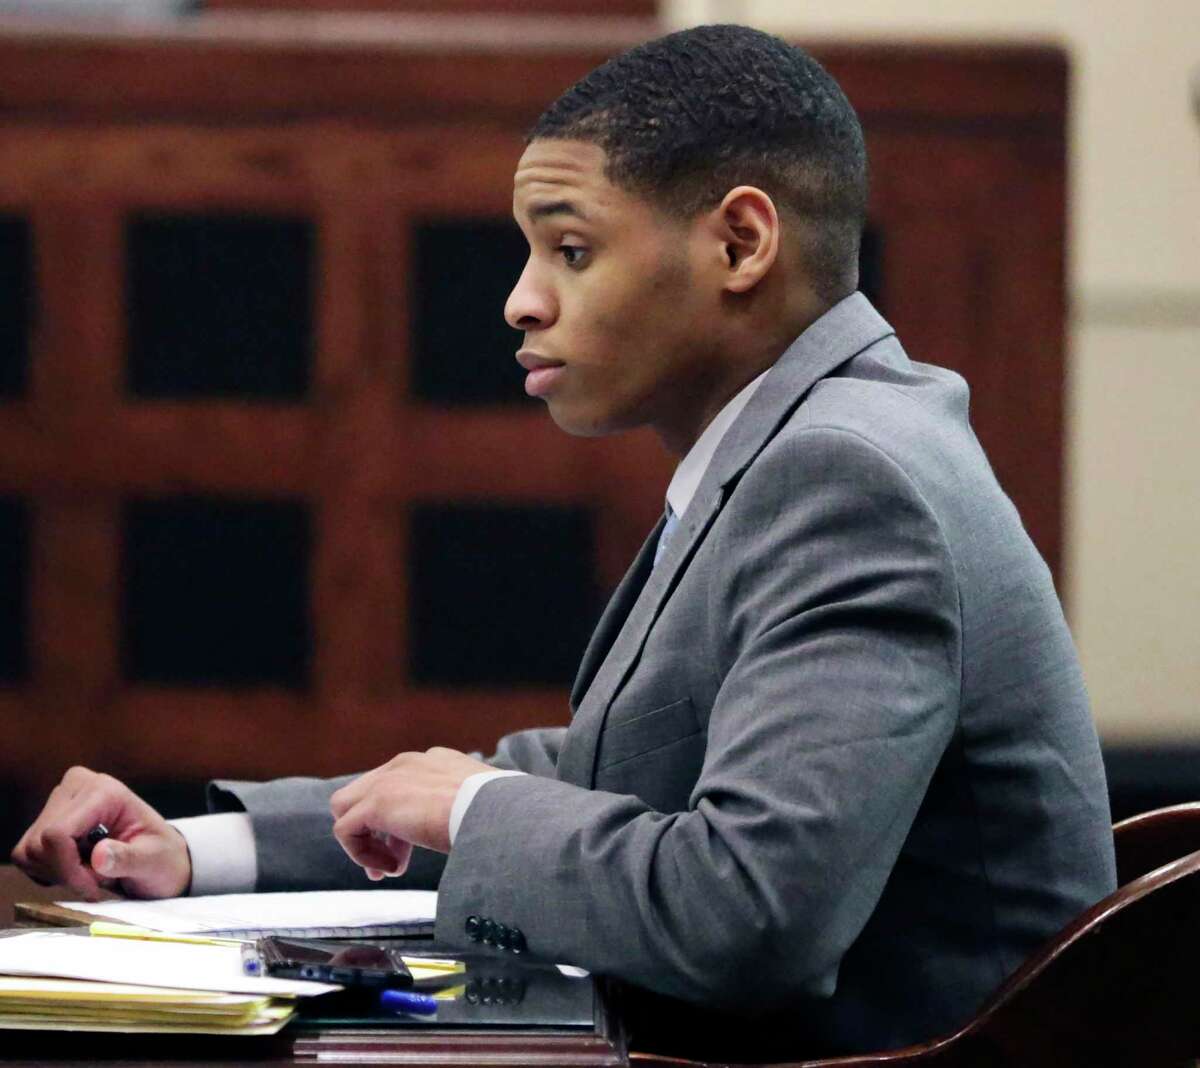 Anton Harris goes over notes before closing statements by attorneys in his sexual assault trial Wednesday, Jan. 29, 2020.